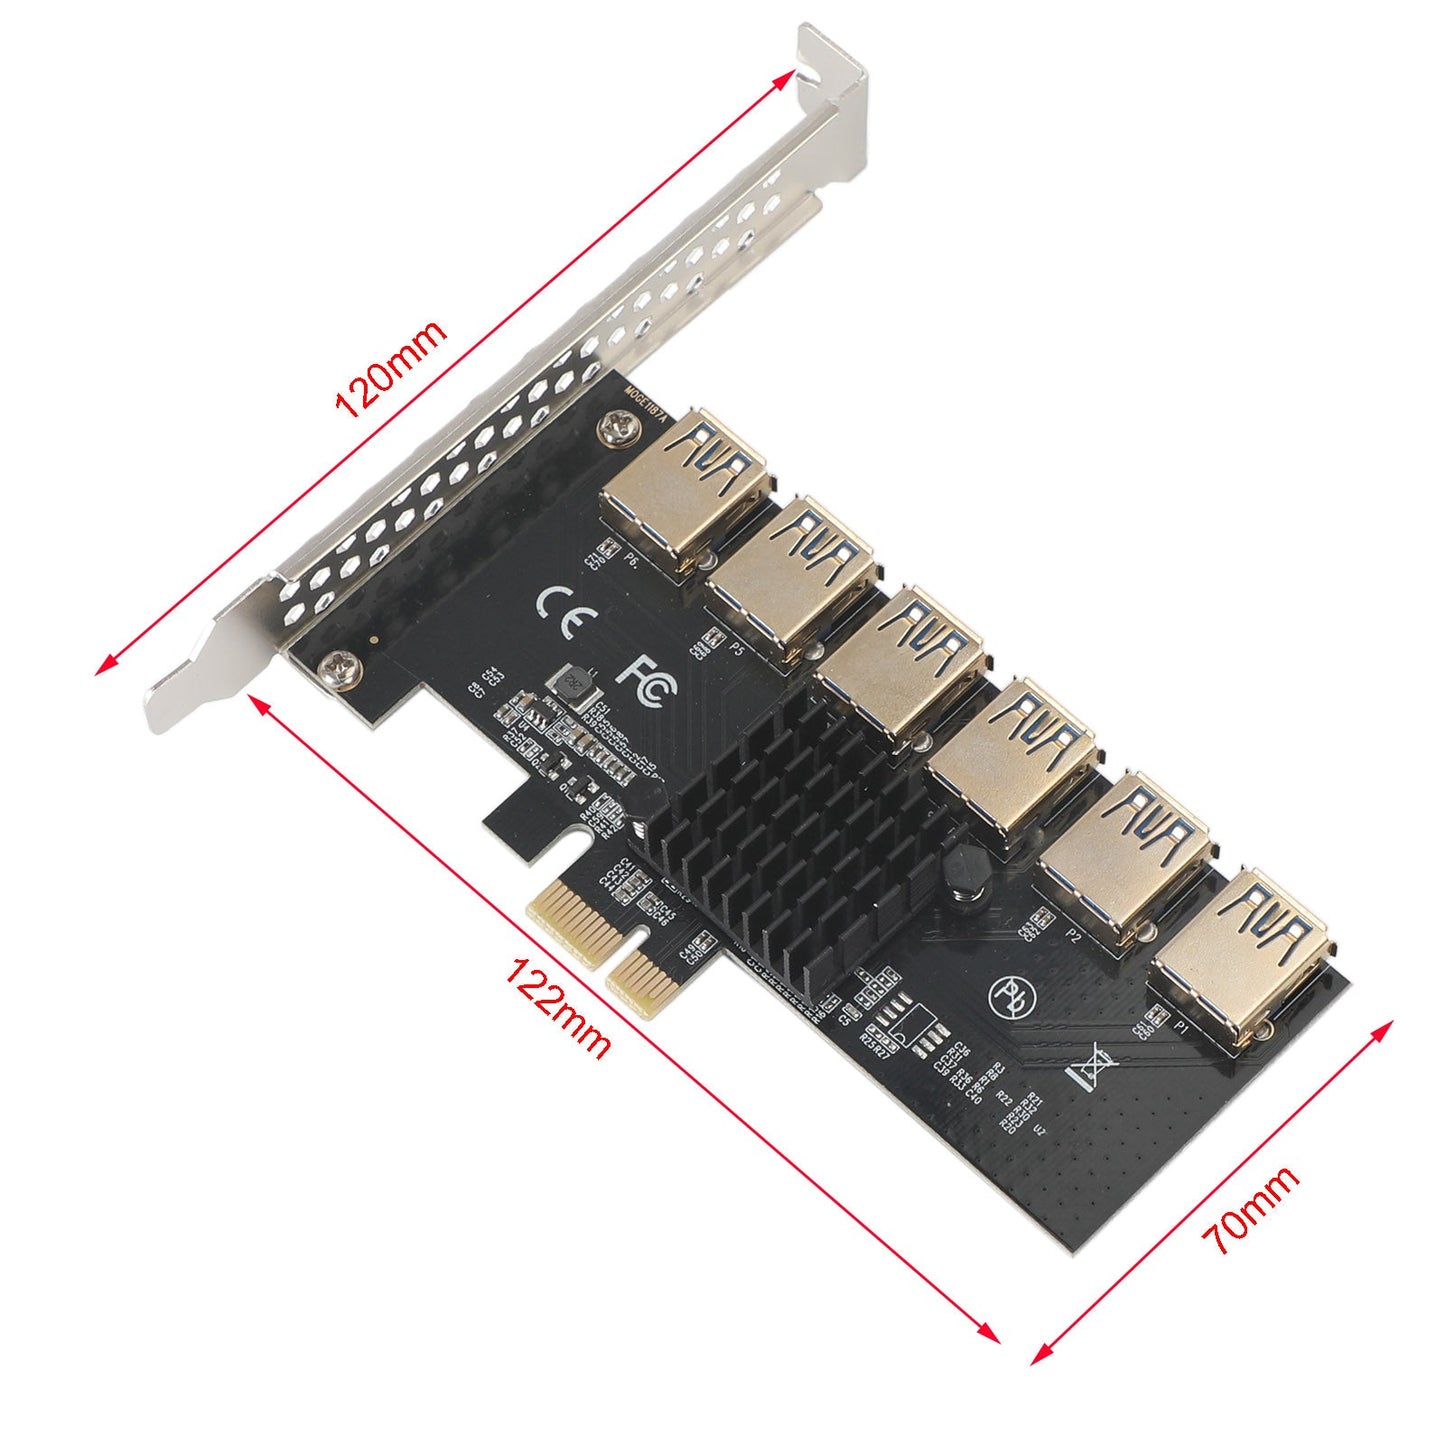 PCI-E 1 to 6 Riser Card USB 3.0 Adapter Multiplier Card fit for Bitcoin Mining